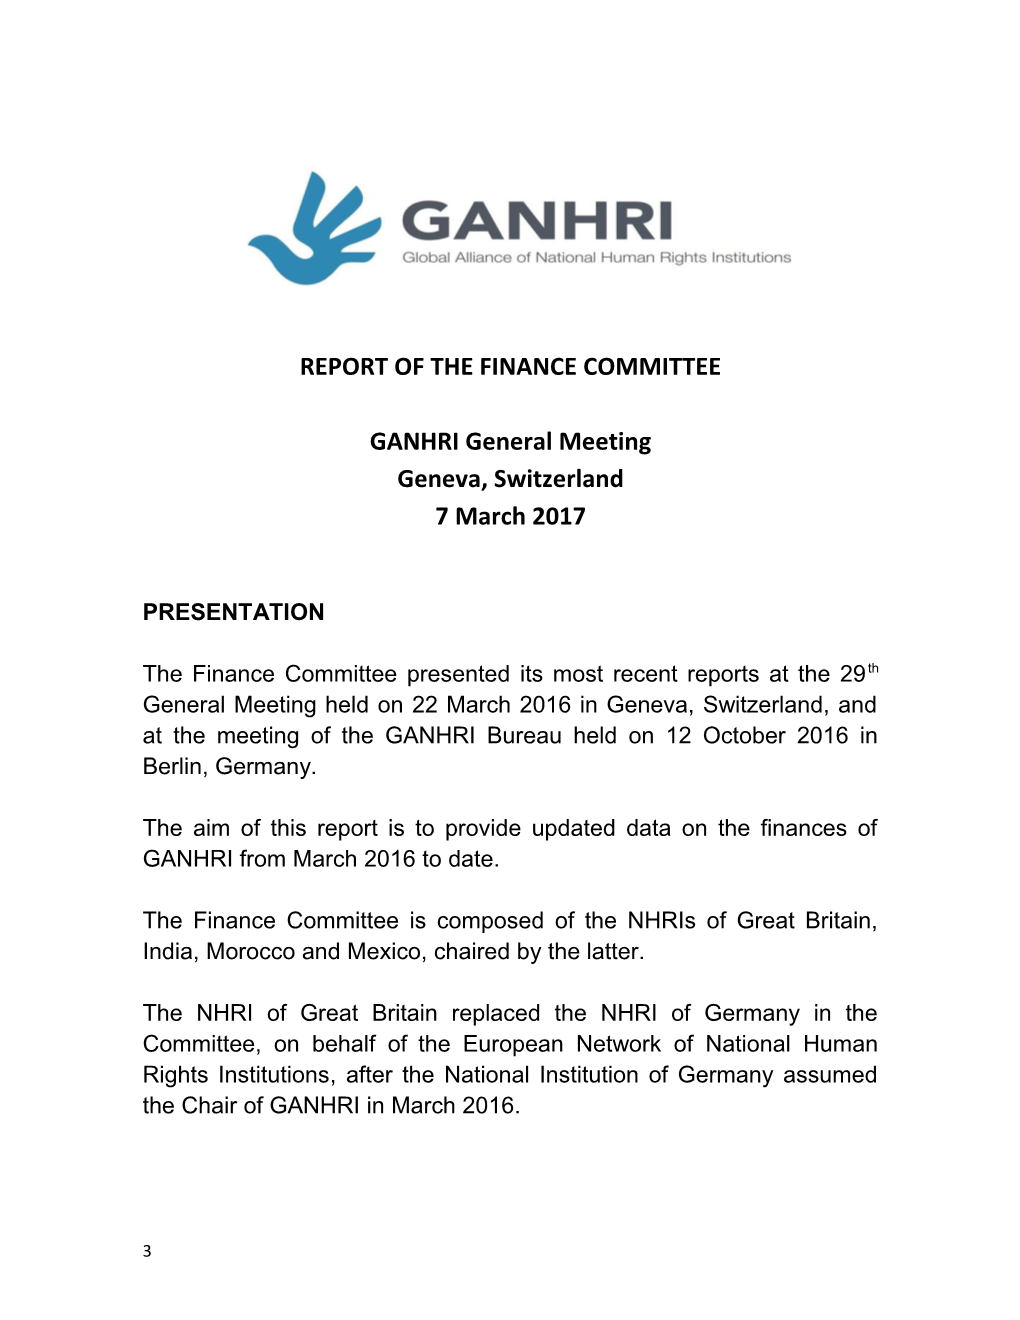 Report of the Finance Committee